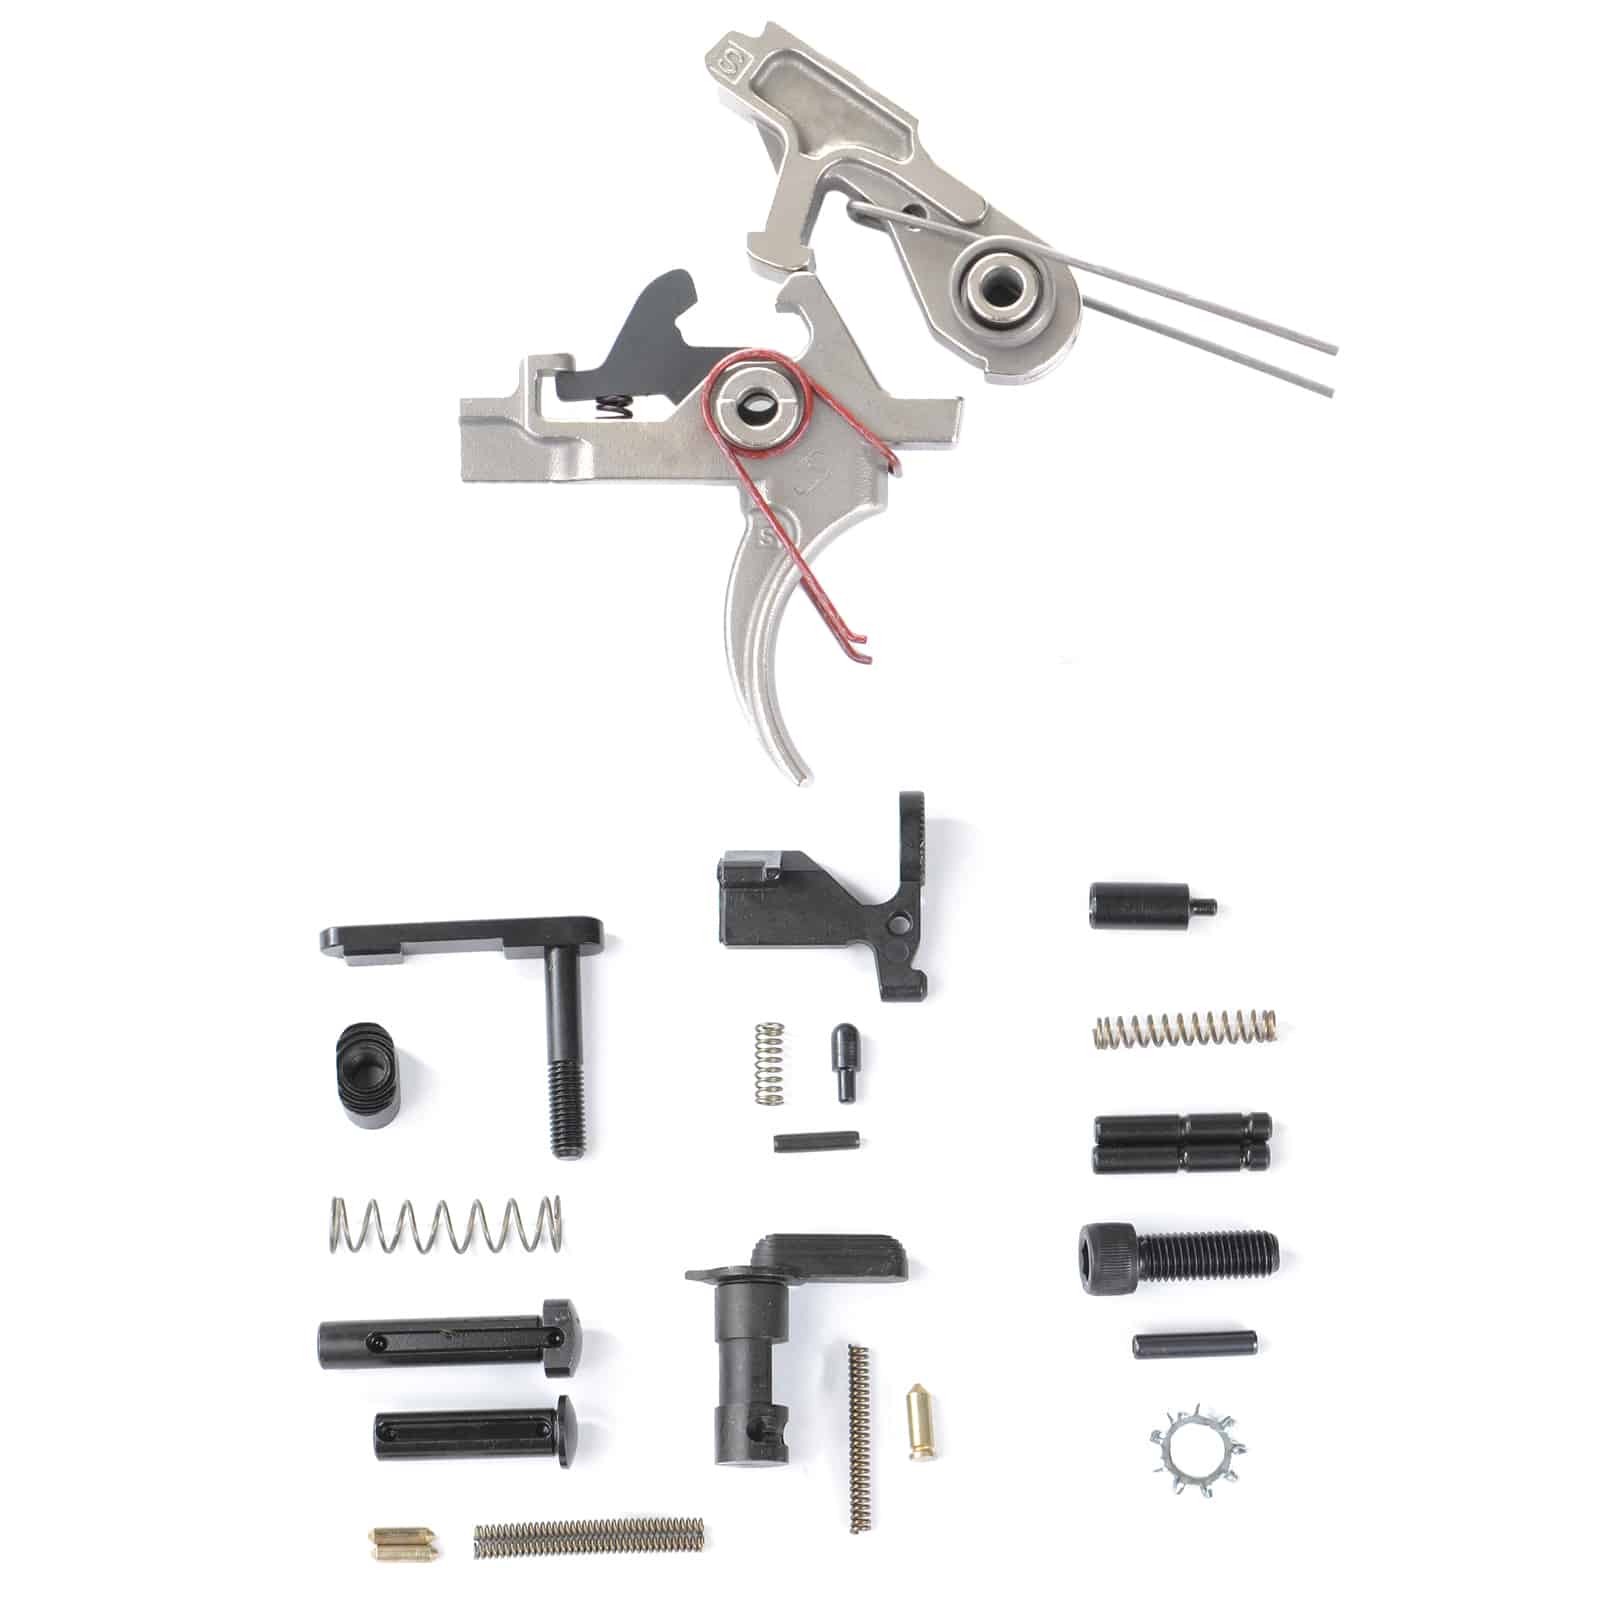 AT3™ 2-Stage AR 15 Lower Parts Kit with Nickel Boron Trigger - No Grip or Trigger Guard